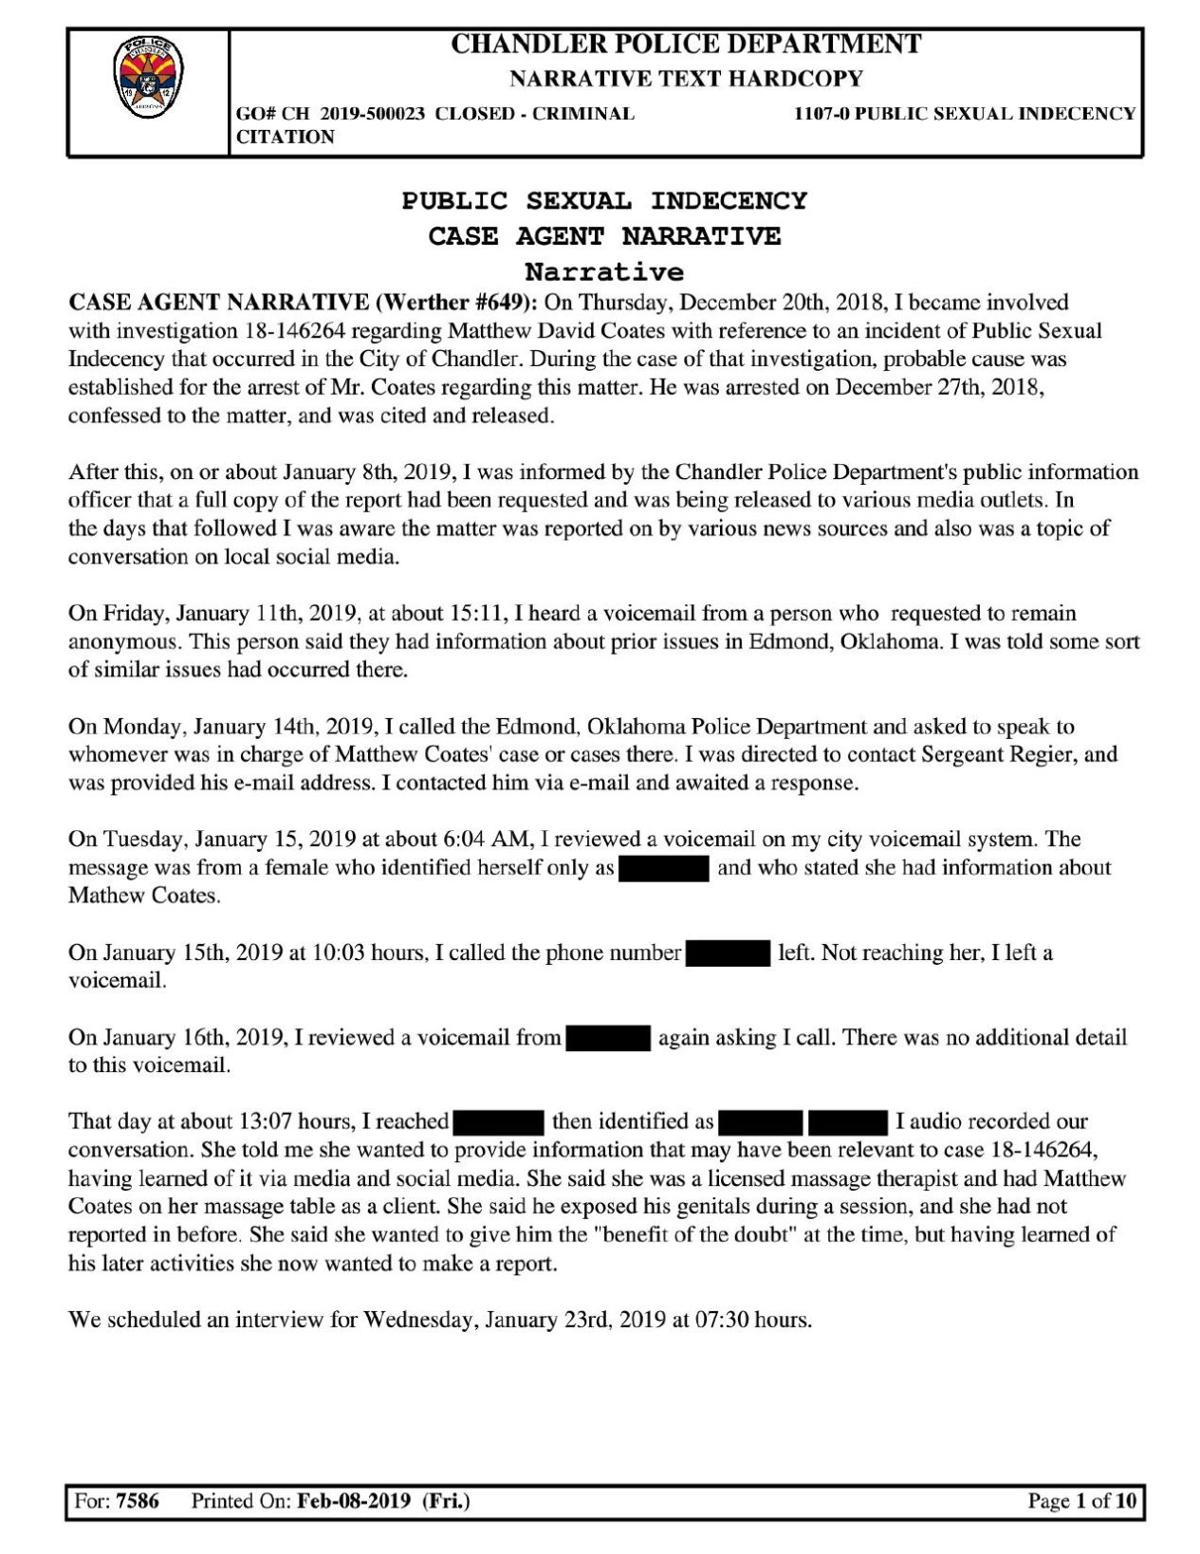 Chandler police report on Coates public indecency charge ...